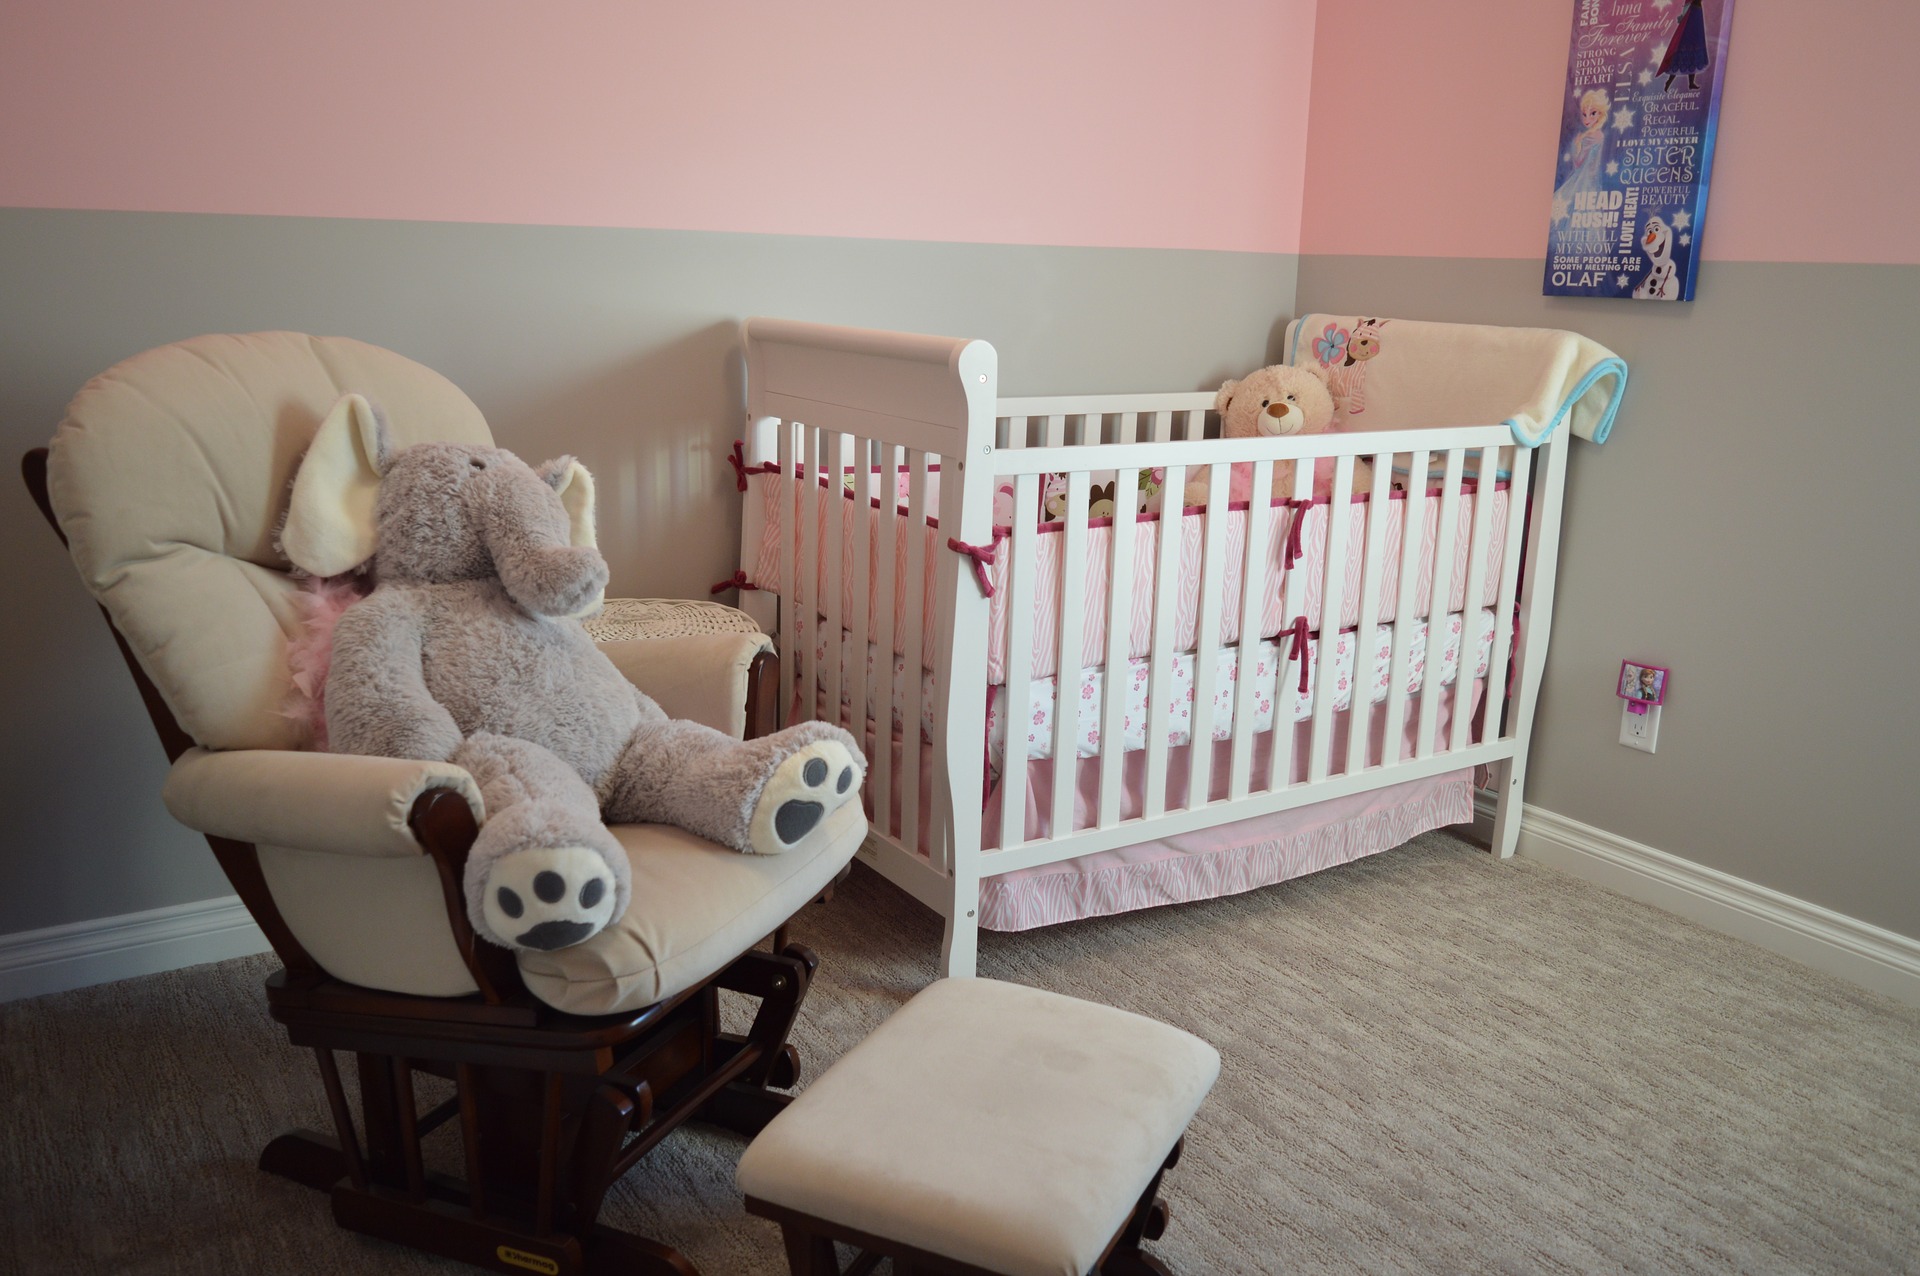 A nursing chair and a baby's cot in a nursery